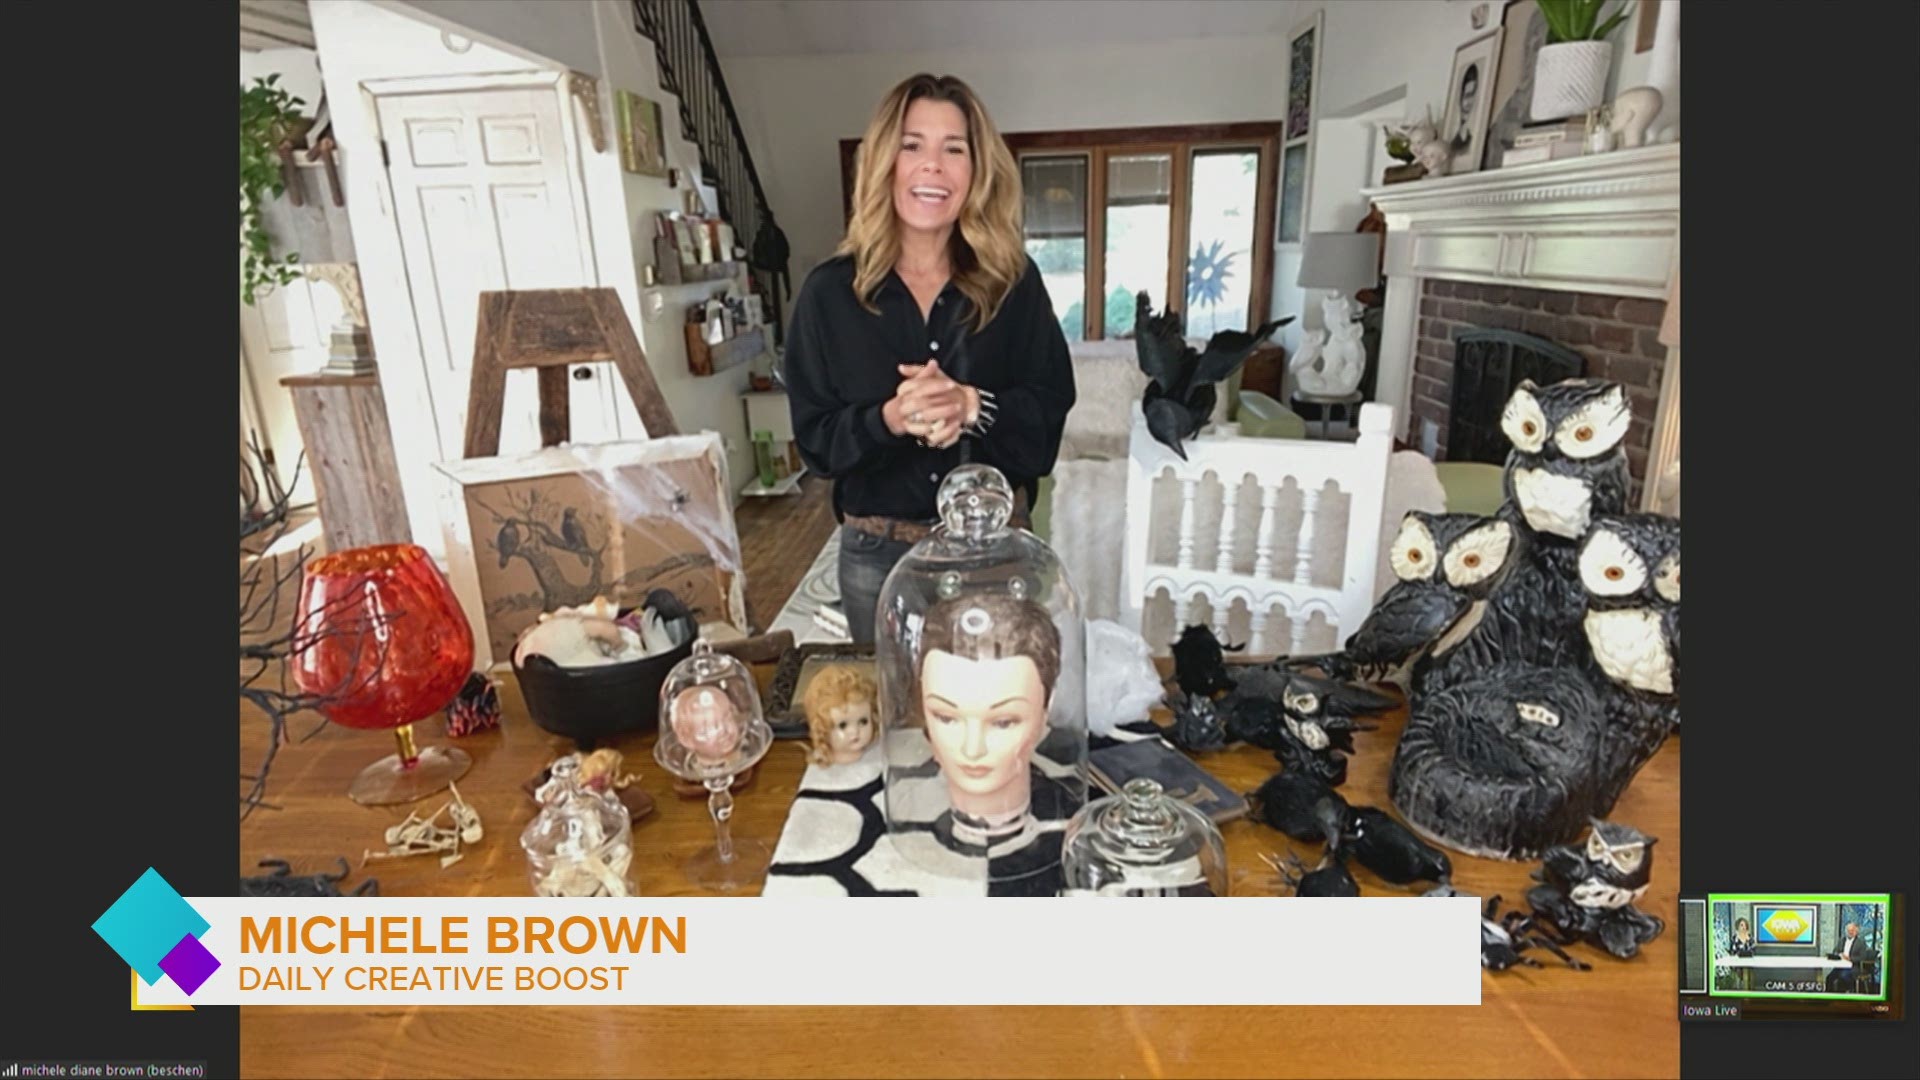 See Michele's spooky décor ideas from this morning on 'Iowa Live'